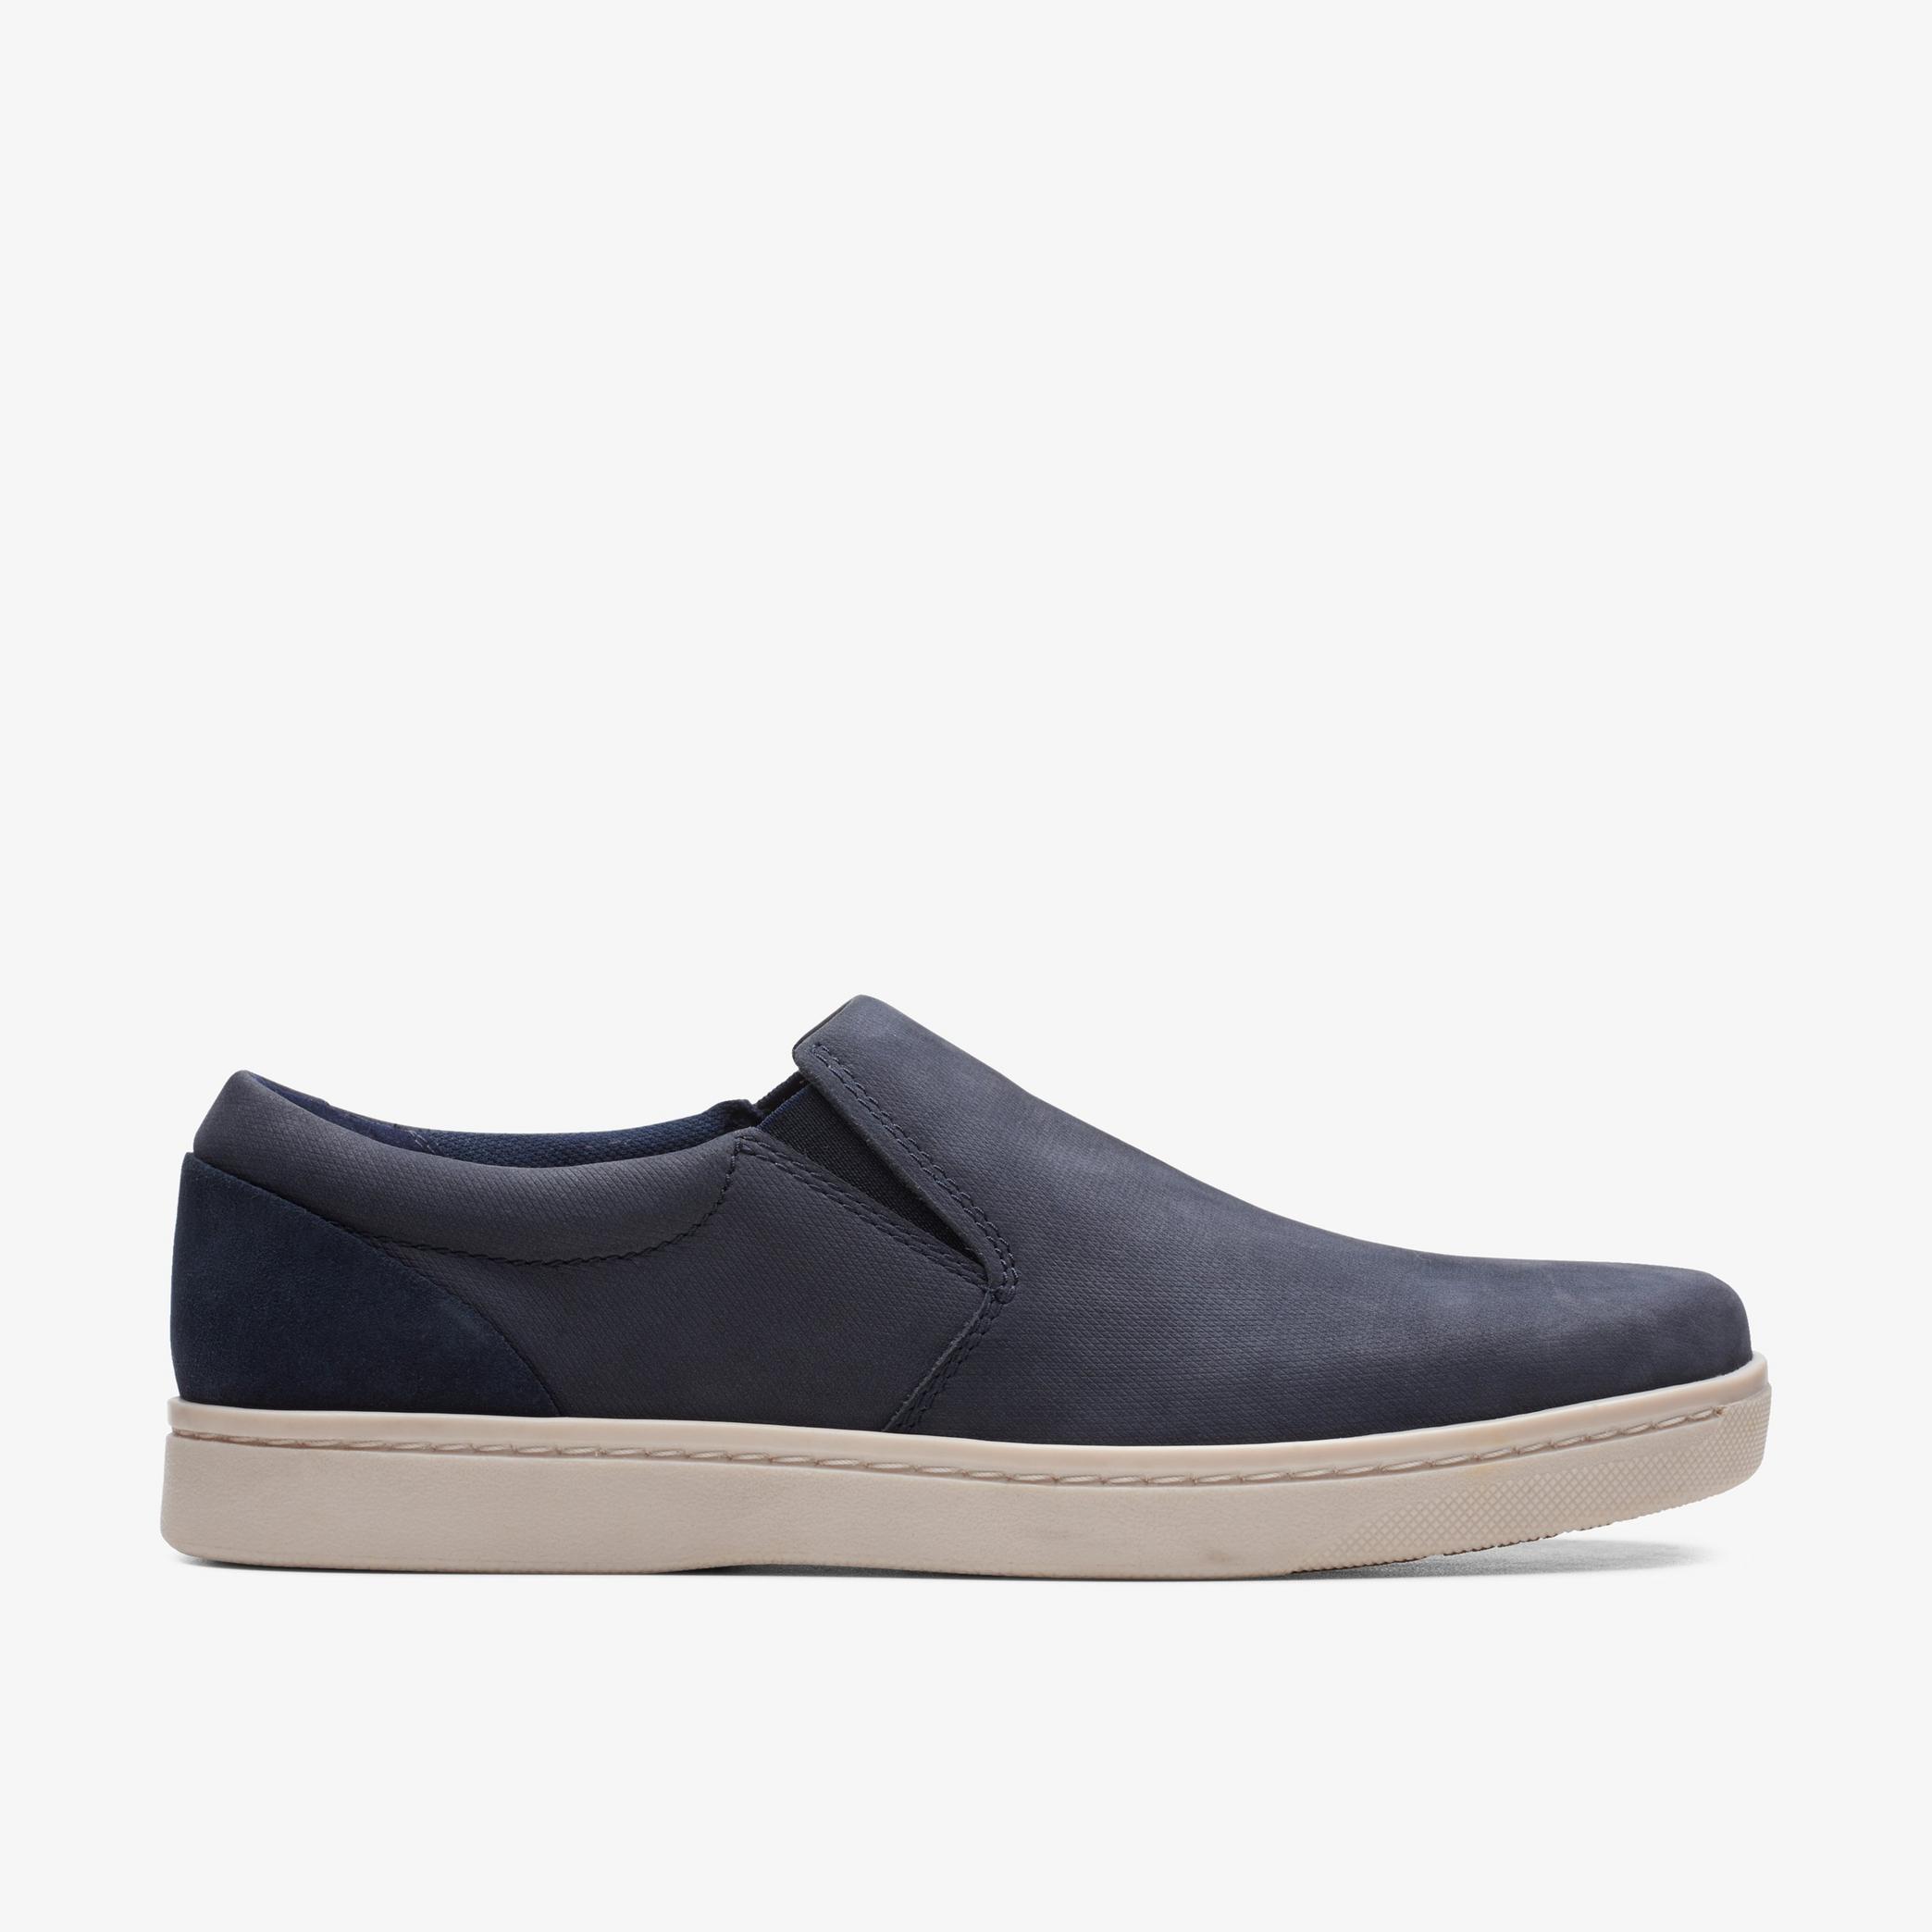 Kitna Free Navy Nubuck Loafers, view 1 of 6